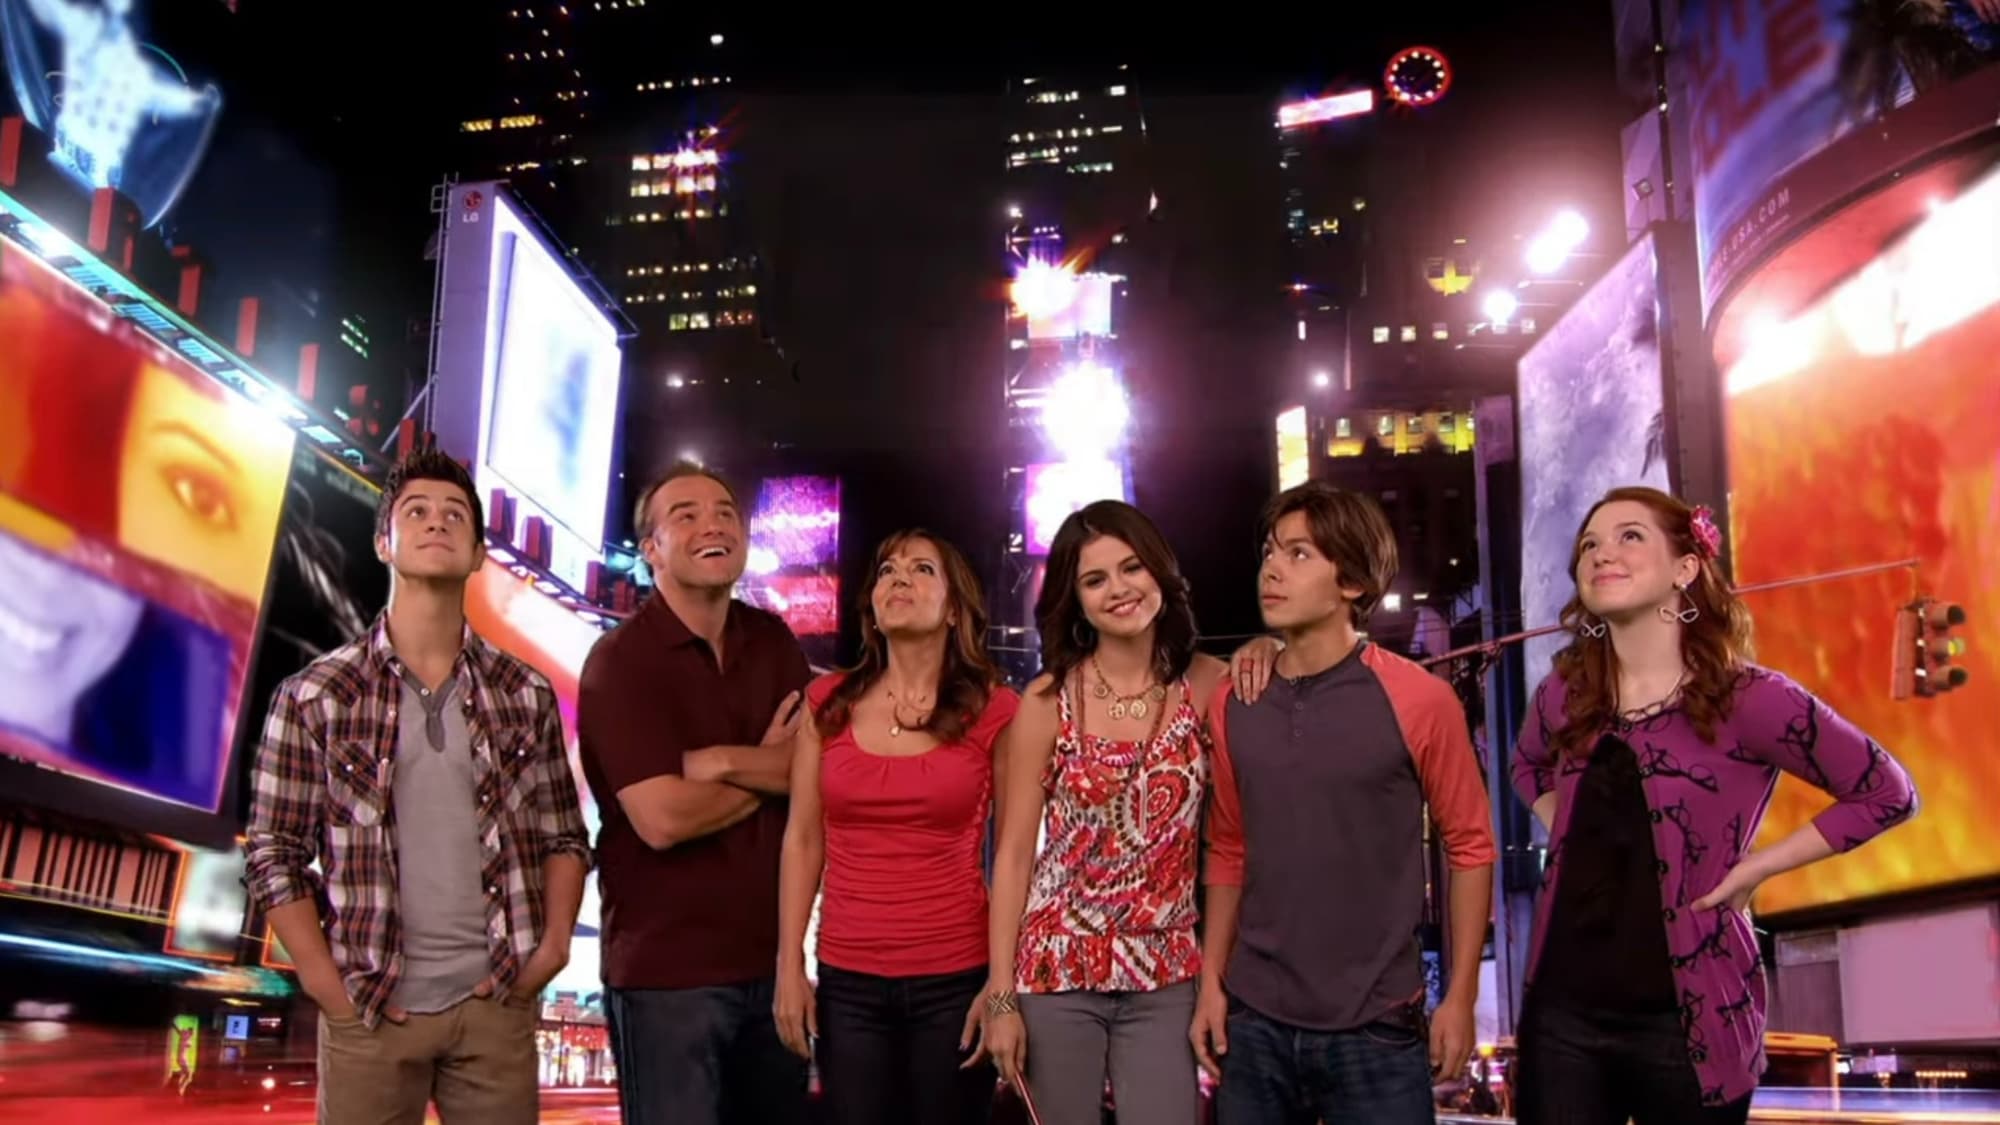 Wizards of Waverly Place returns to Selena Gomez and David Henry